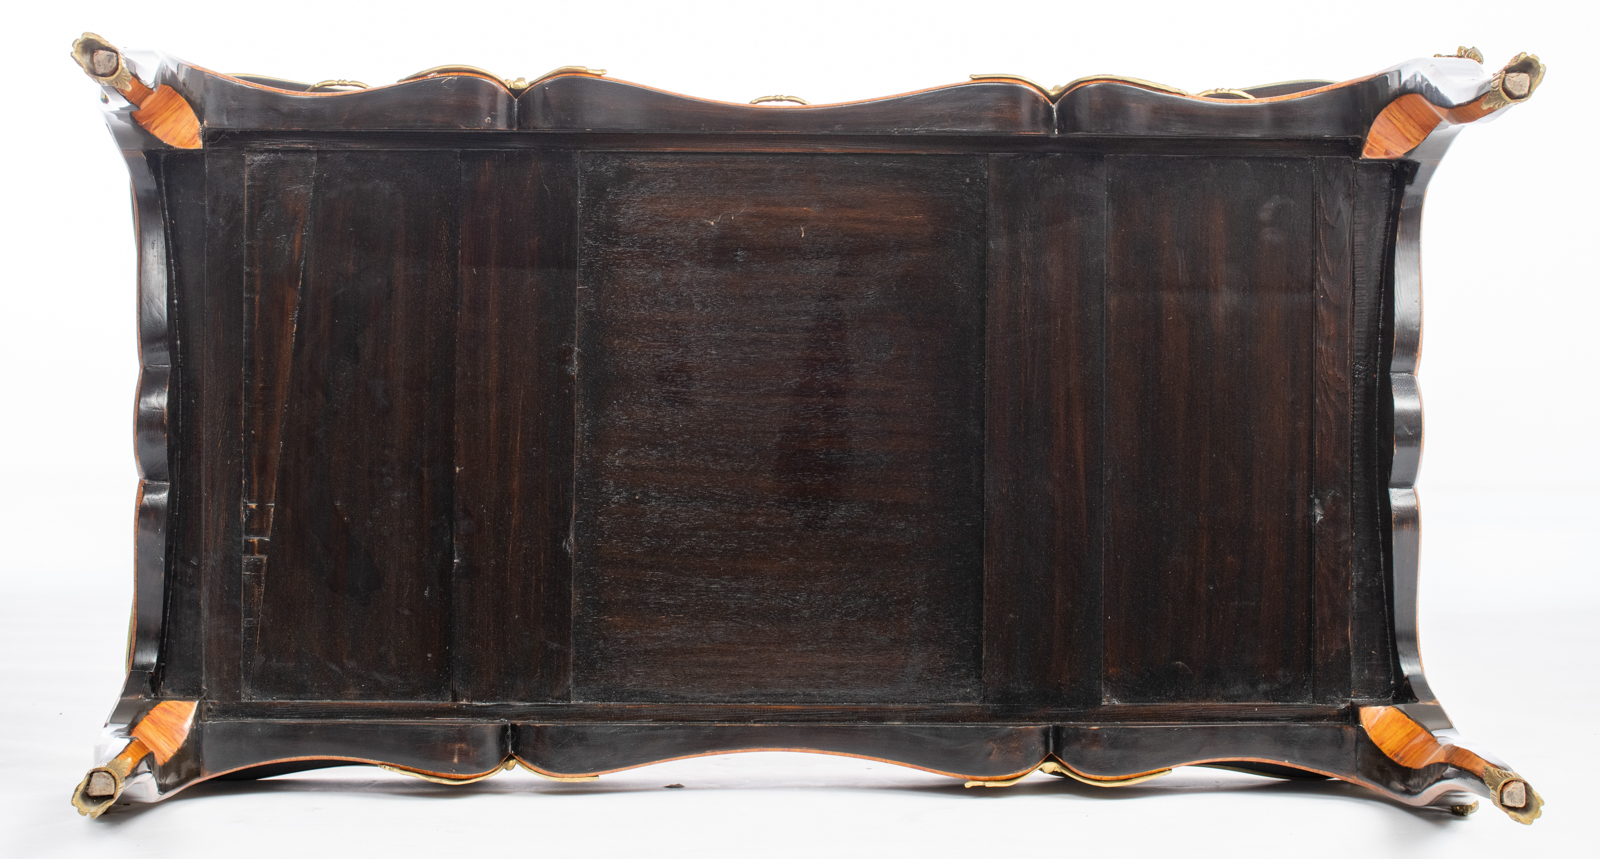 A fine Louis XV style lacquered bureau plat, decorated with gilt bronze mounts and rich marquetry of - Image 7 of 8